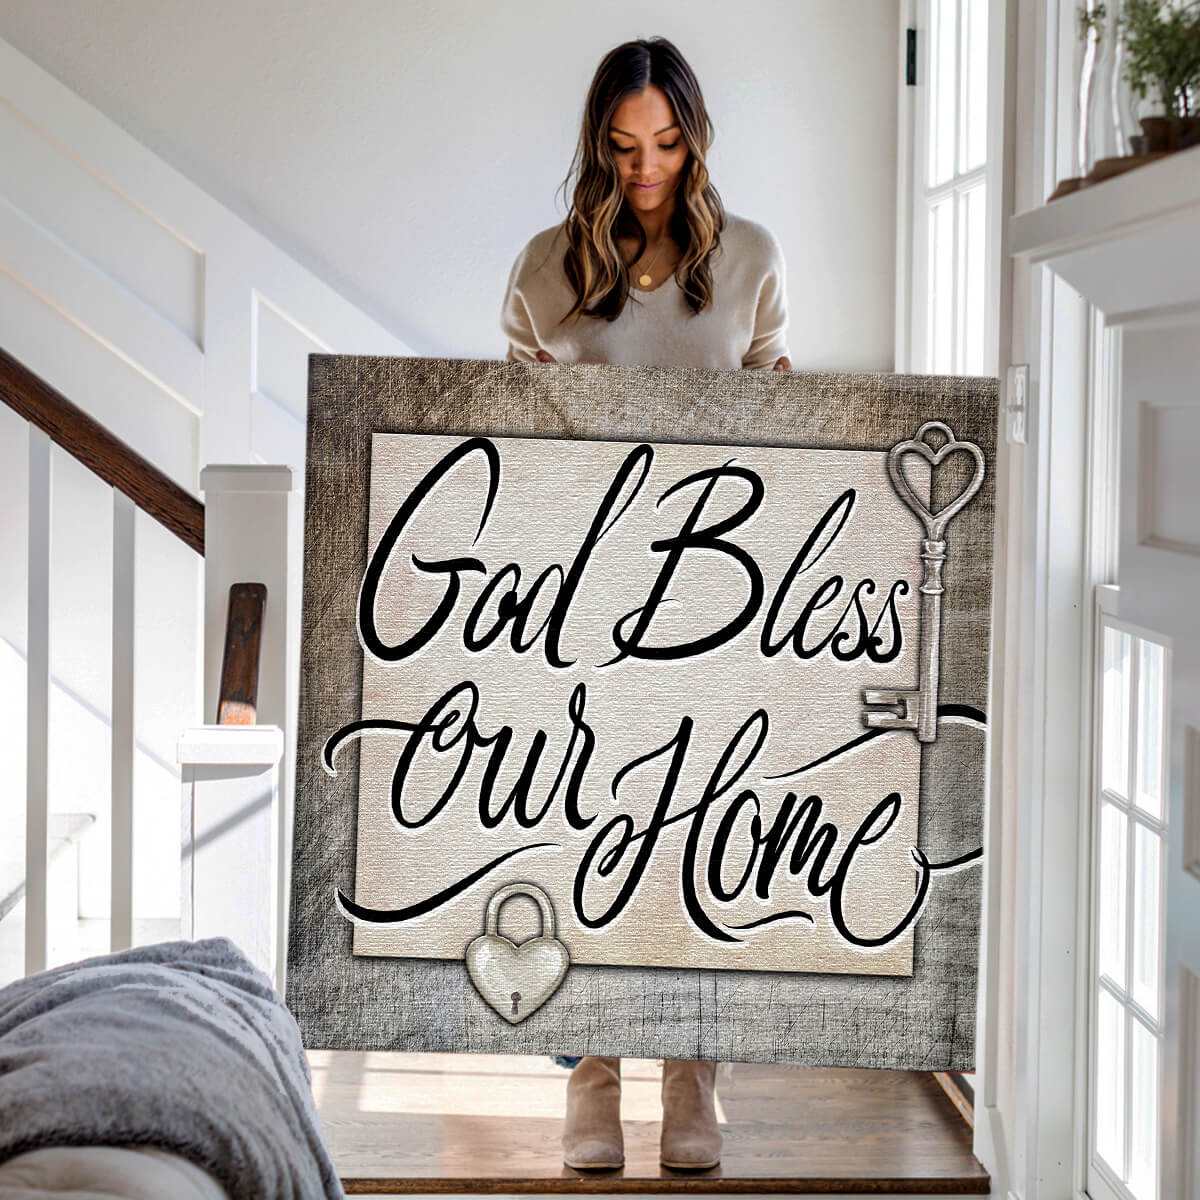 "God Bless Our Home" Premium Canvas Wall Art